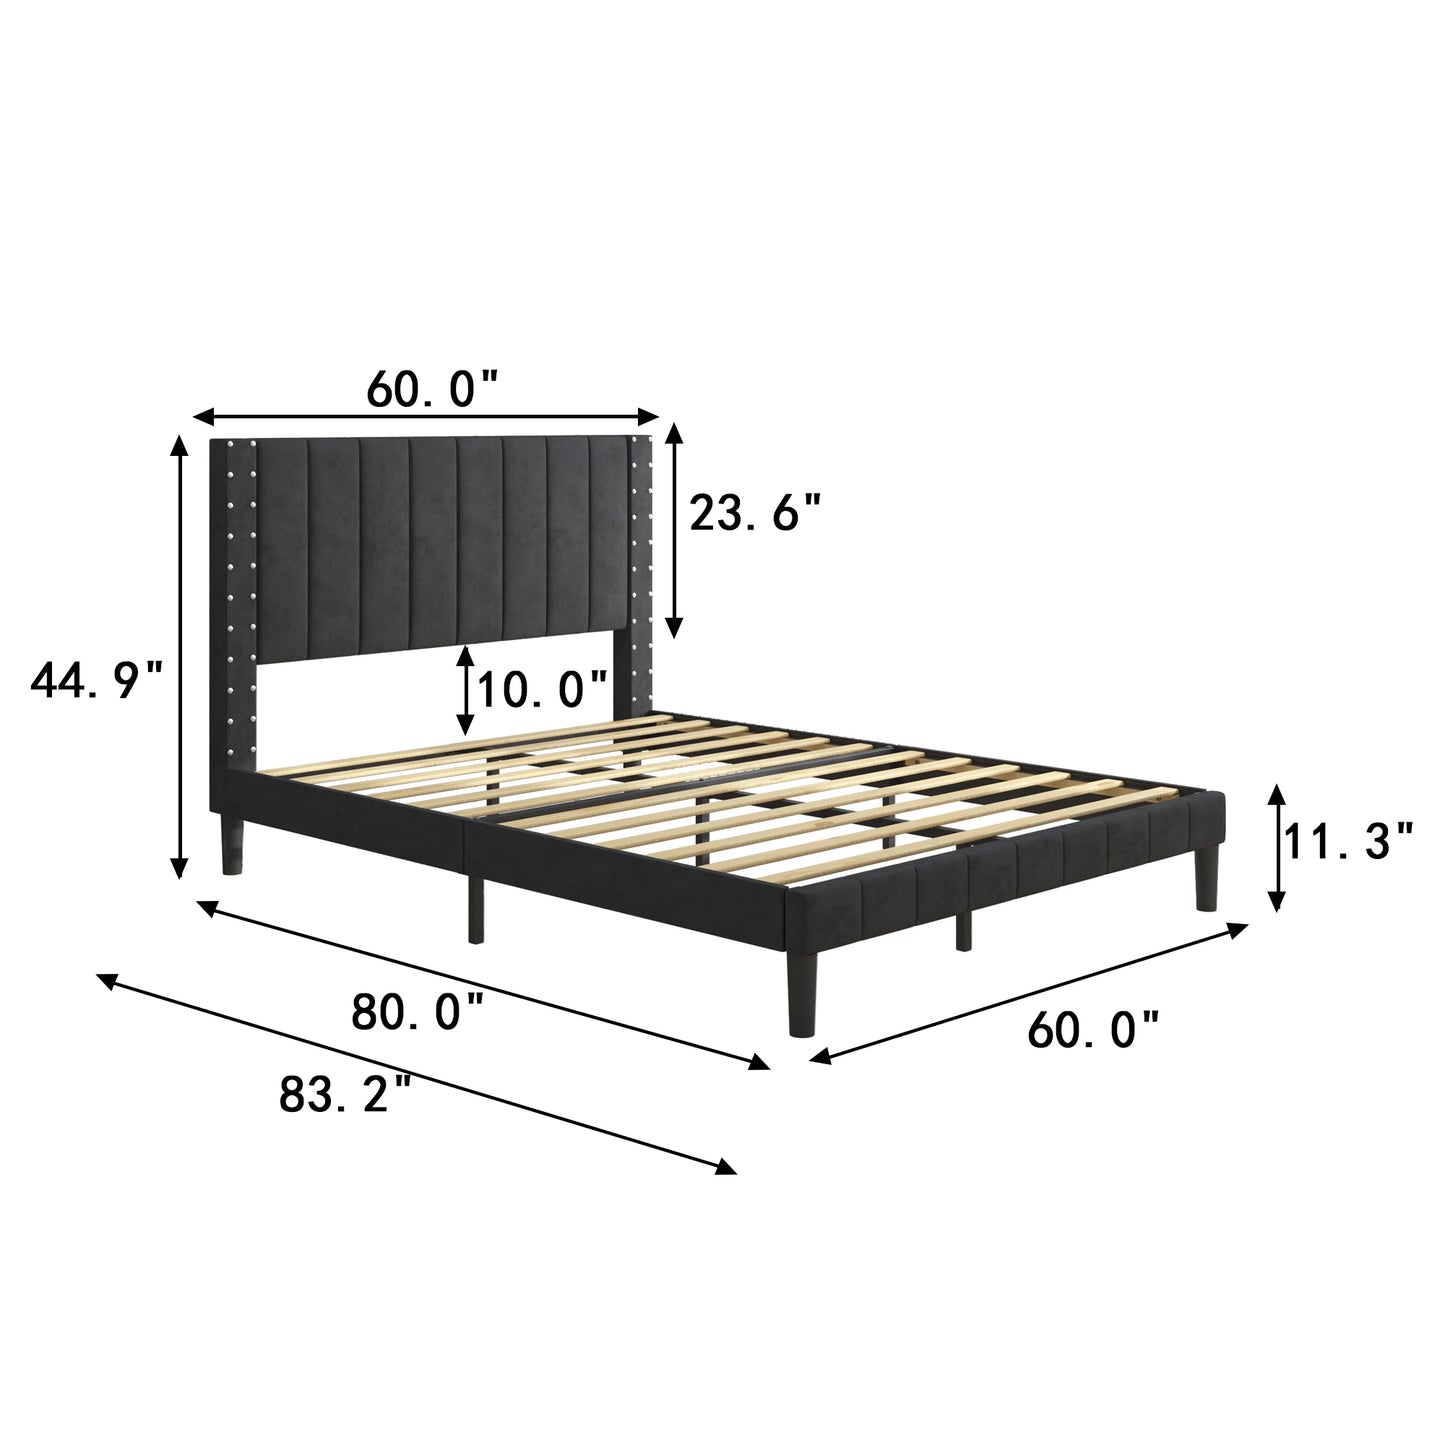 SYNGAR Queen Bed Frame, Modern Bed Frame with Square Tufted Upholstered Headboard, Wood Slat Support, Beige